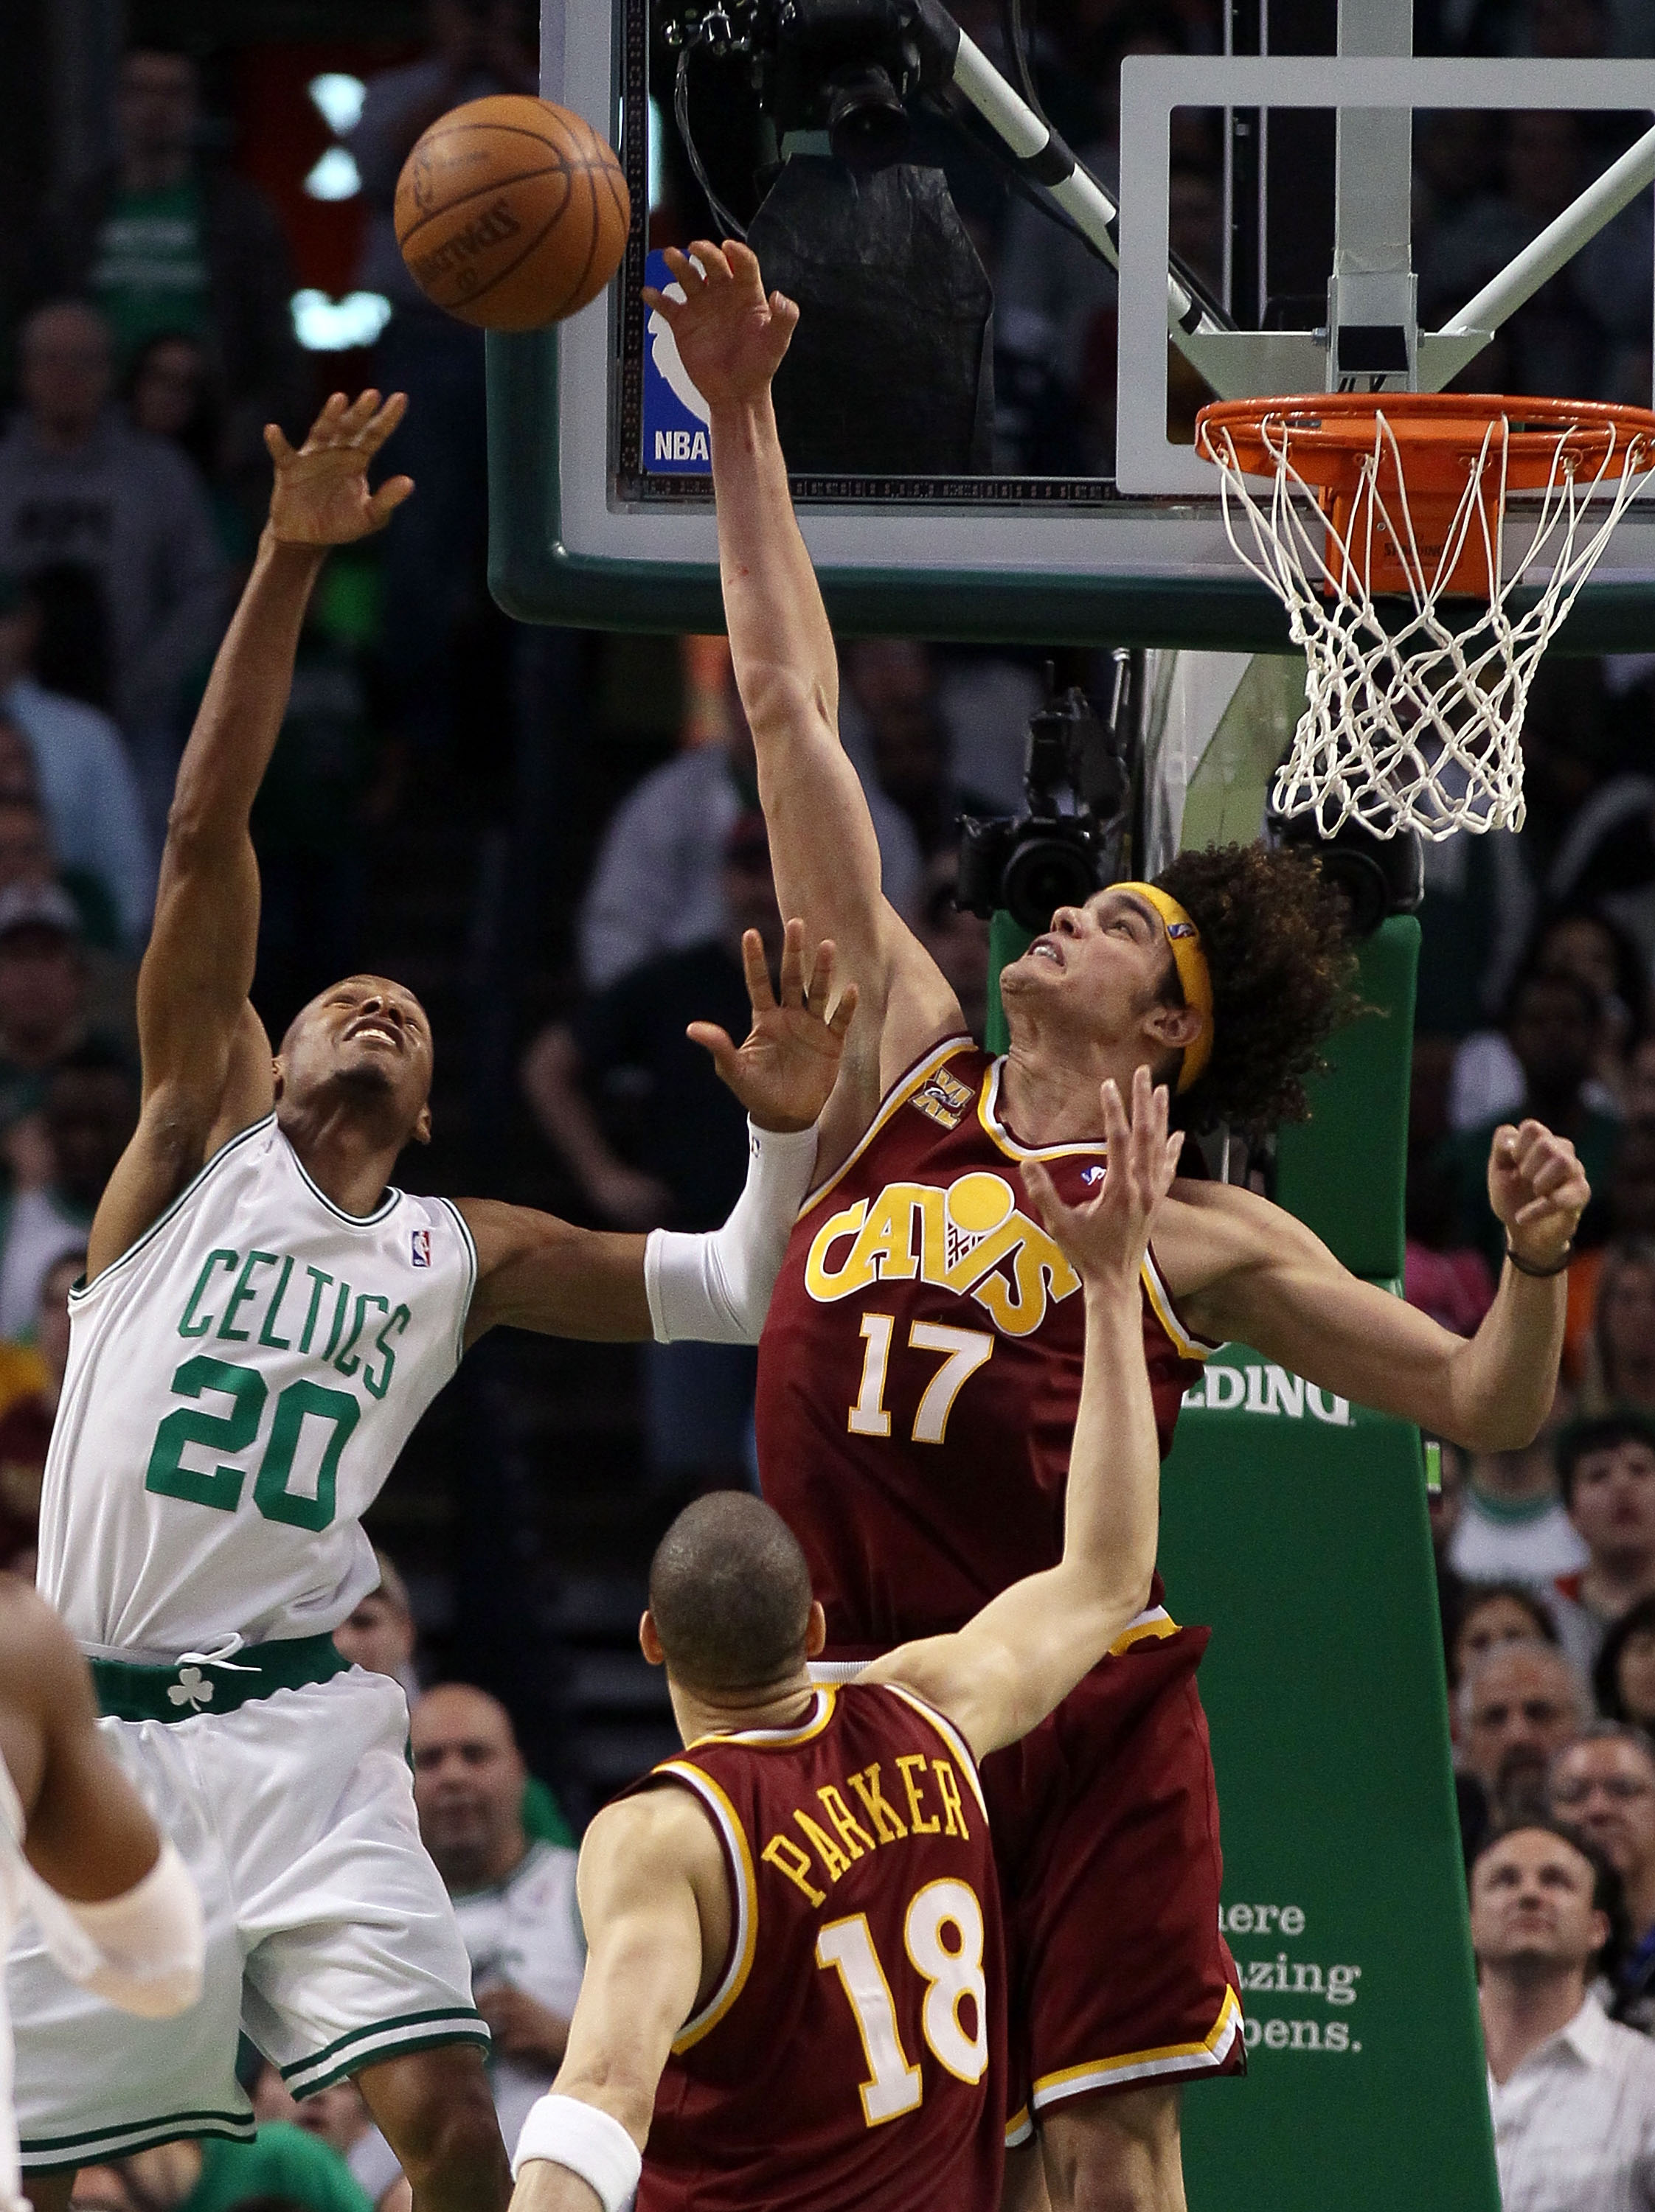 BOSTON - MAY 09:  Anderson Varejao #17 of the Cleveland Cavaliers tries to block Ray Allen #20 of the Boston Celtics during Game Four of the Eastern Conference Semifinals of the 2010 NBA playoffs at TD Garden on May 9, 2010 in Boston, Massachusetts. The C